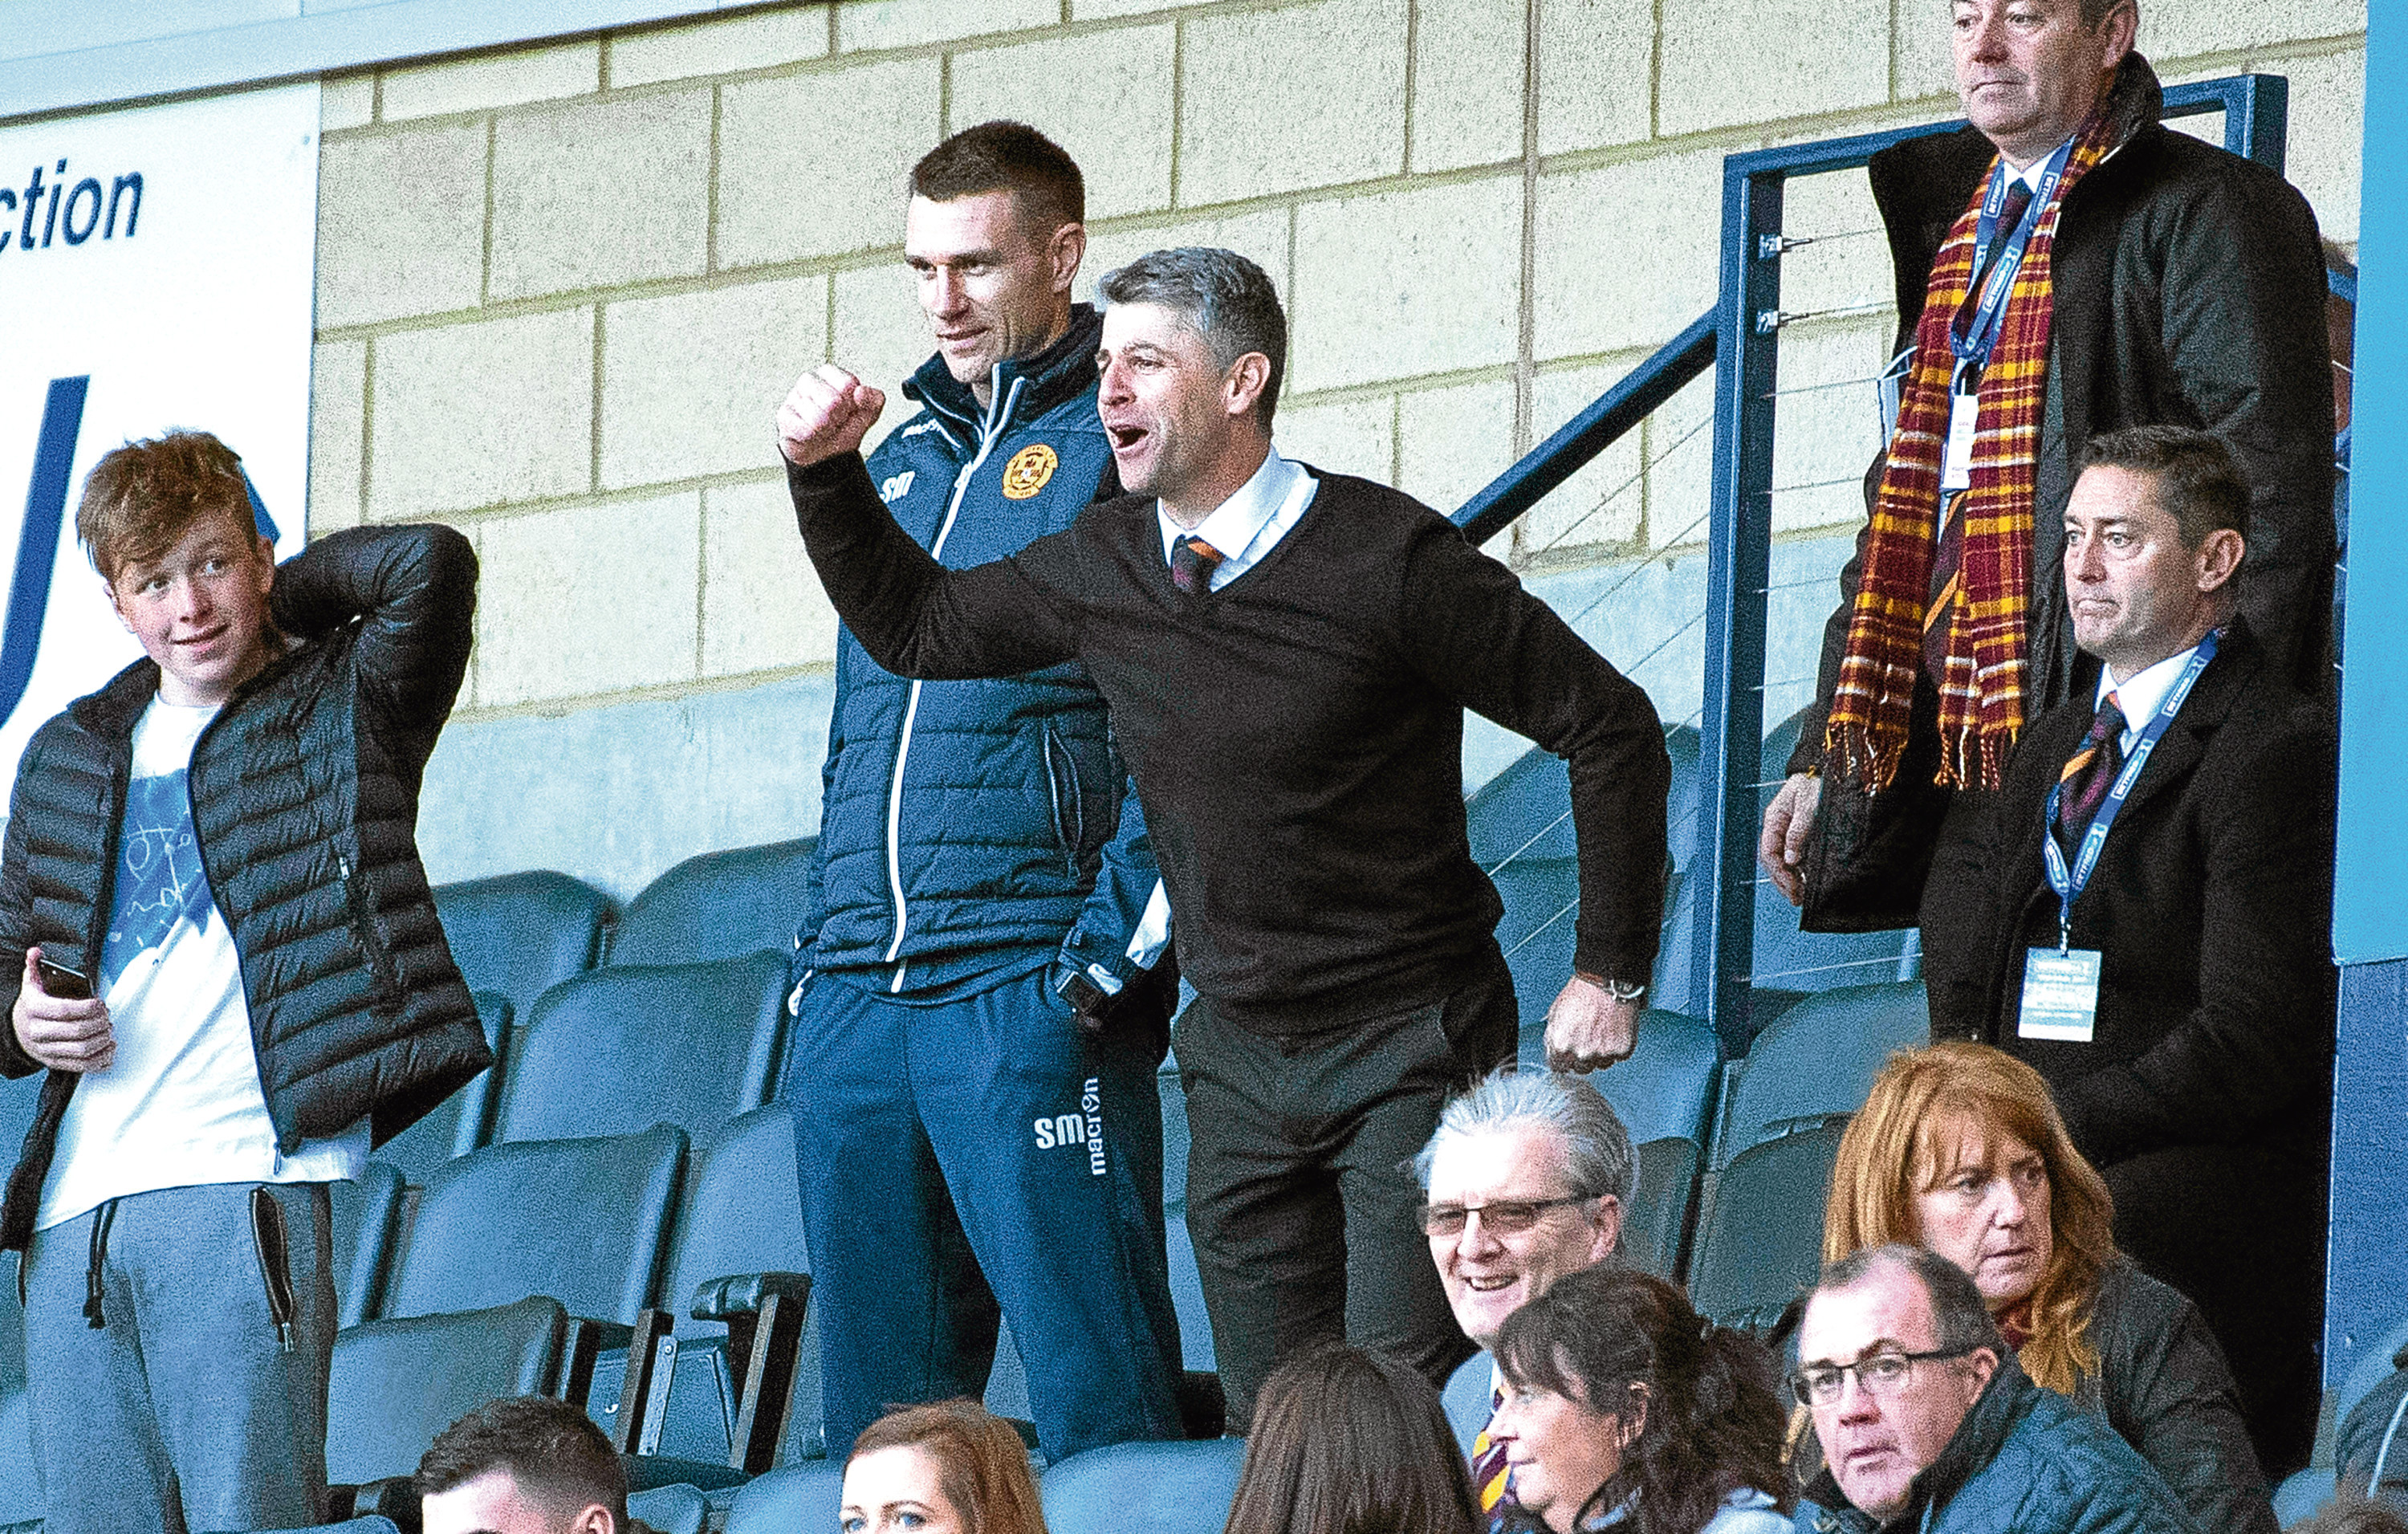 Motherwell manager Stephen Robinson celebrates in the stands. (SNS)